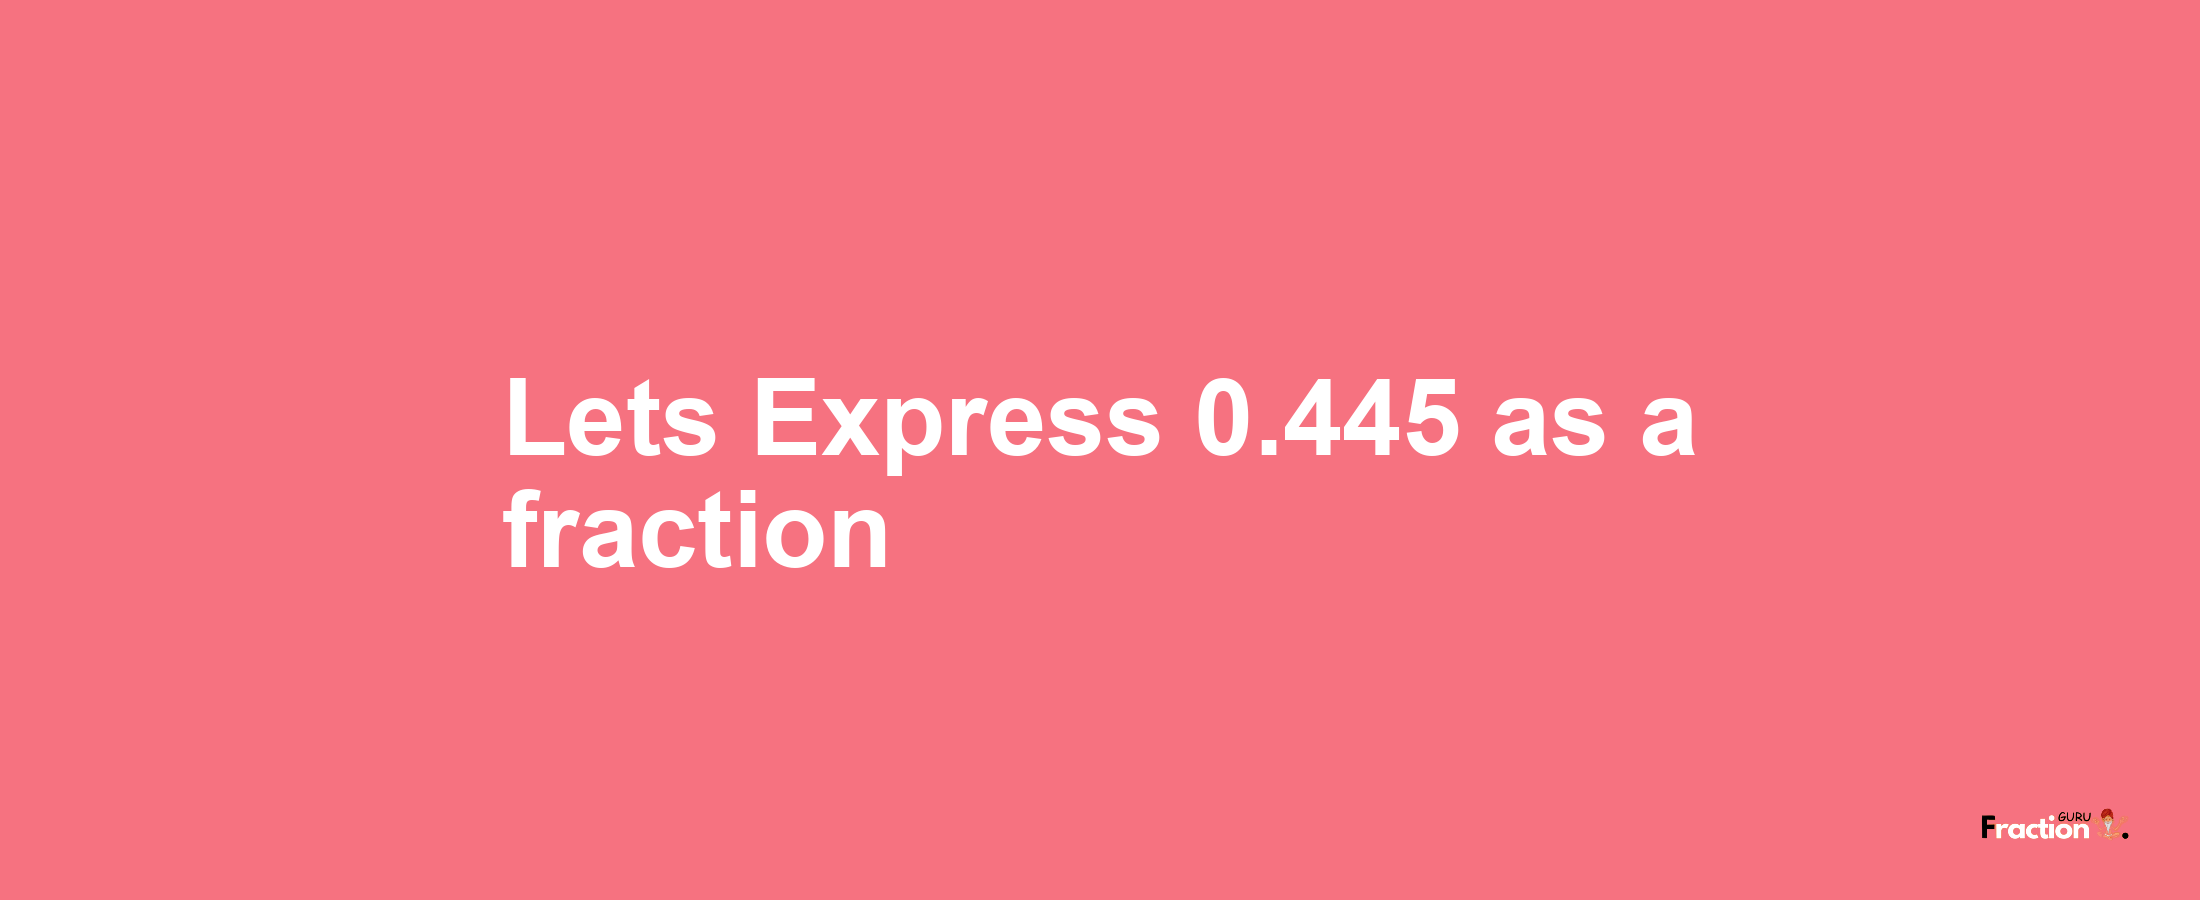 Lets Express 0.445 as afraction